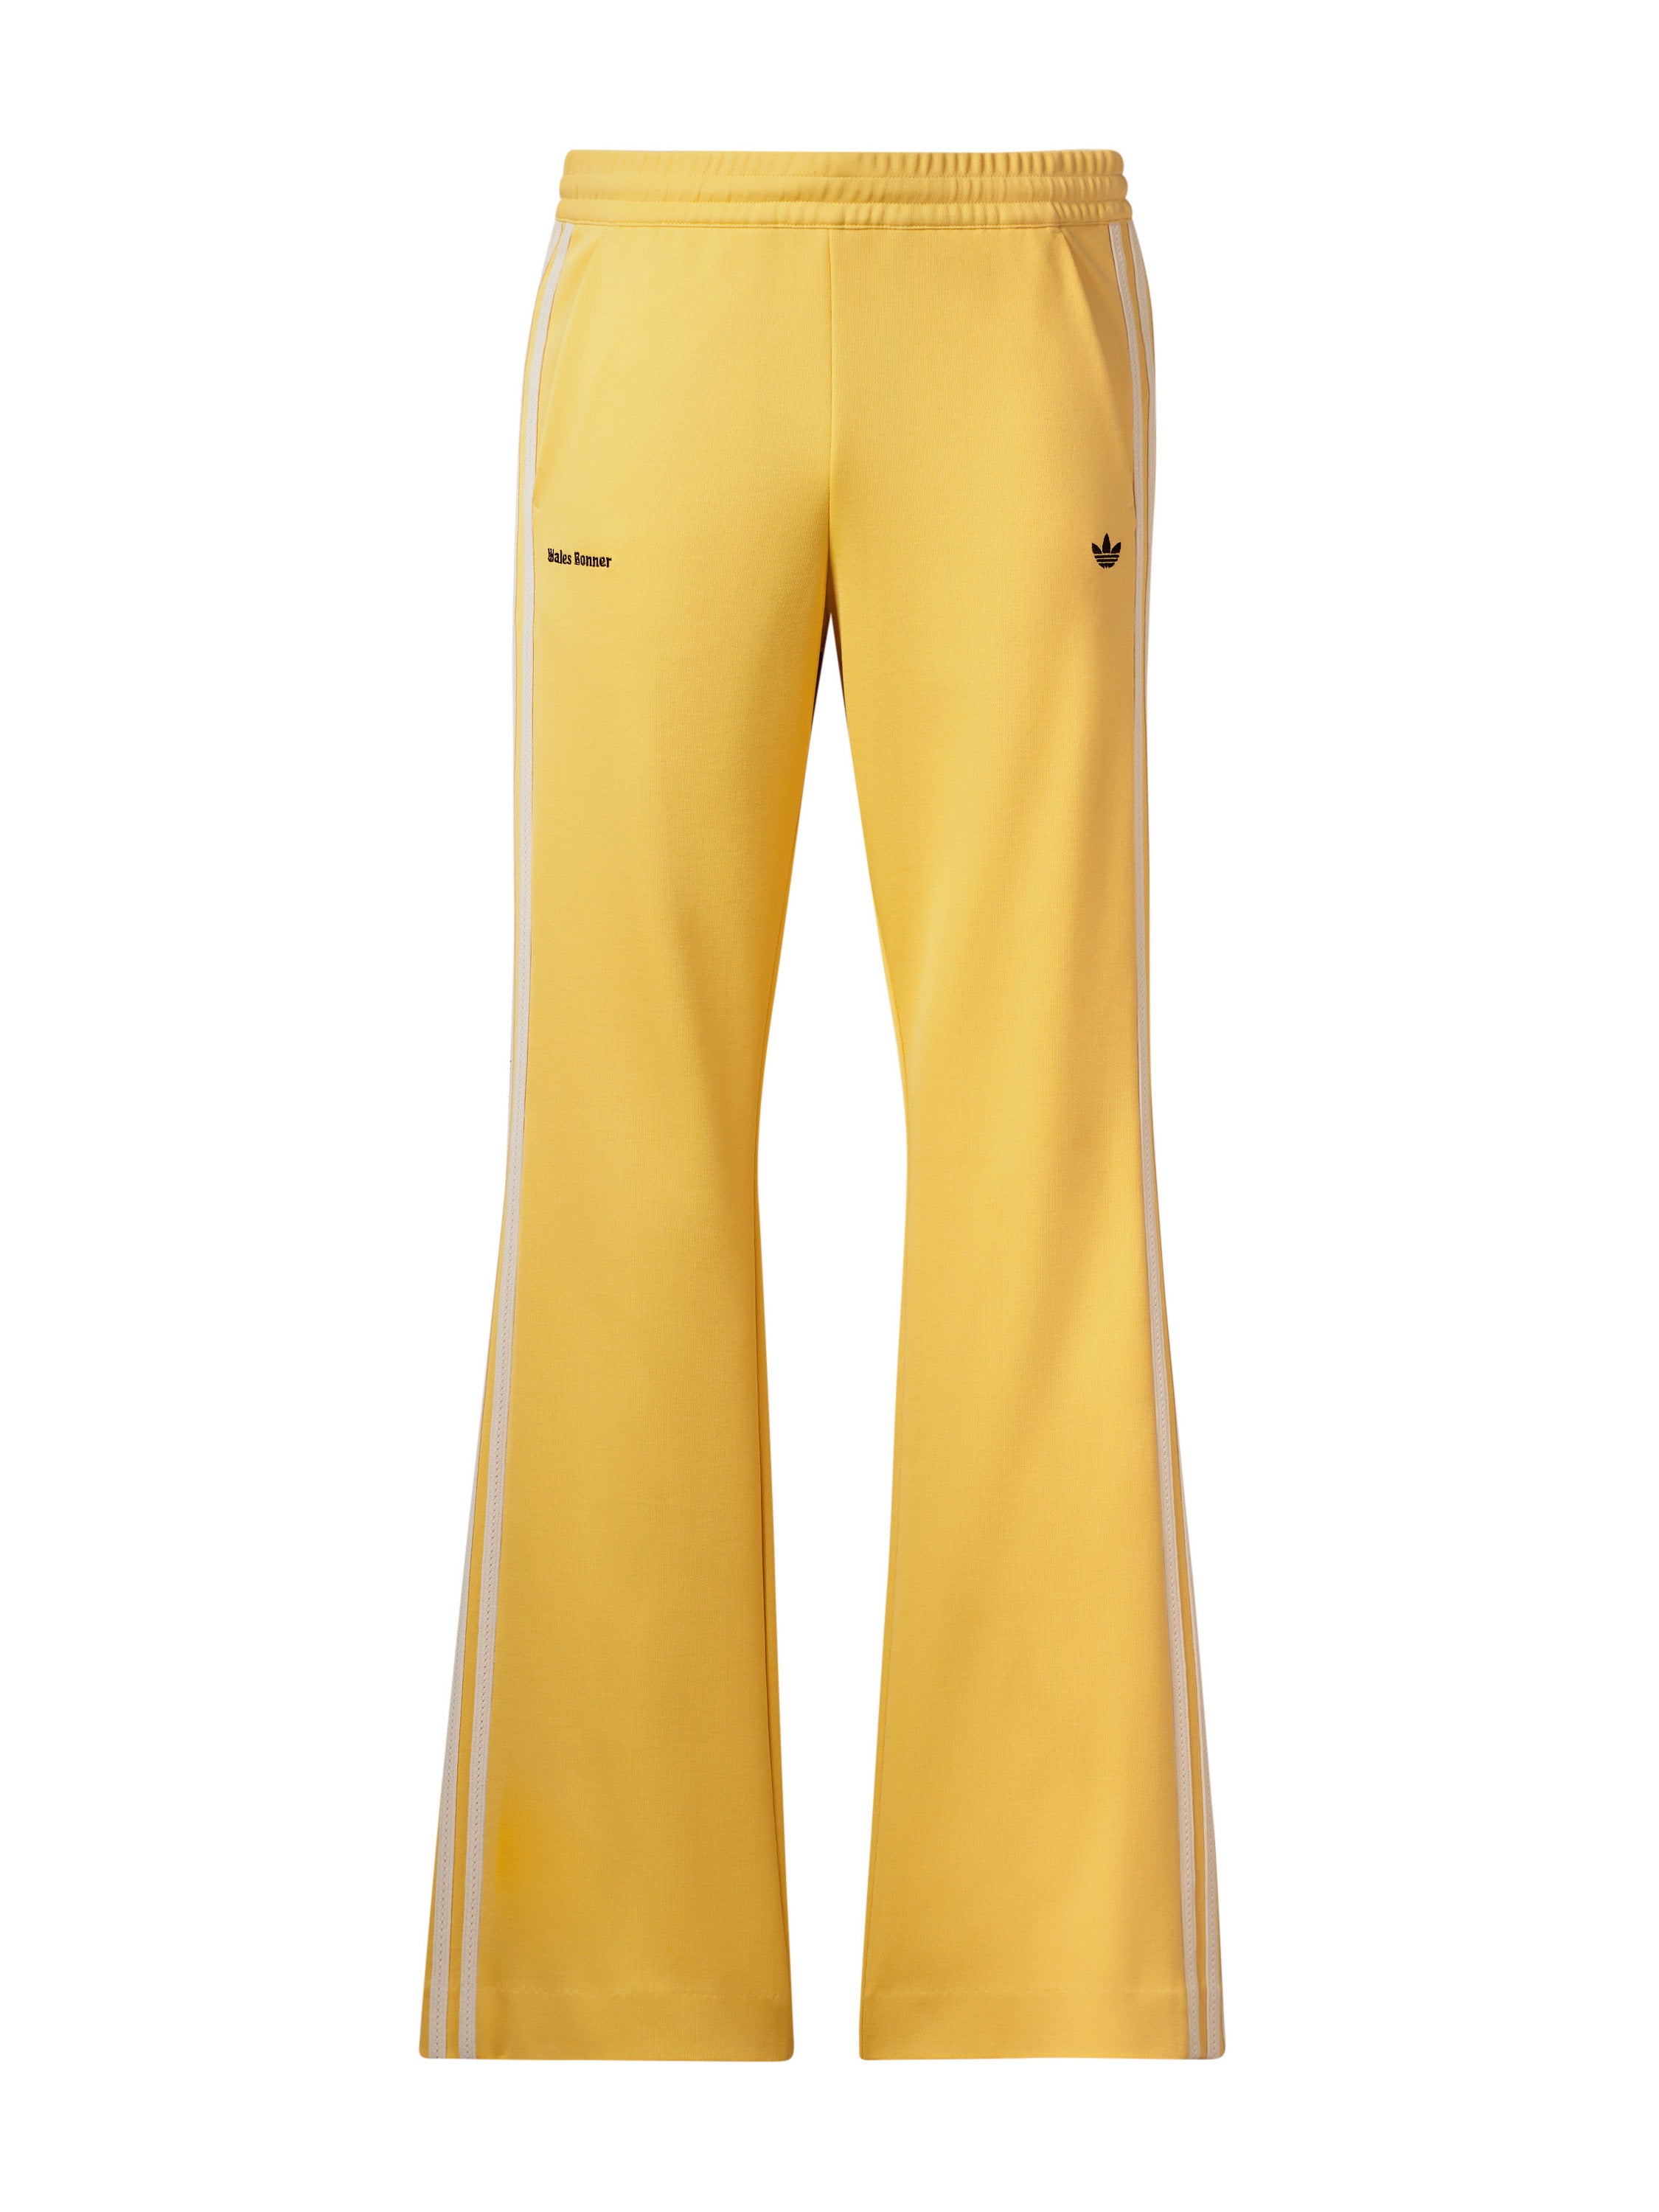 80s Track Pants - Yellow/Brown